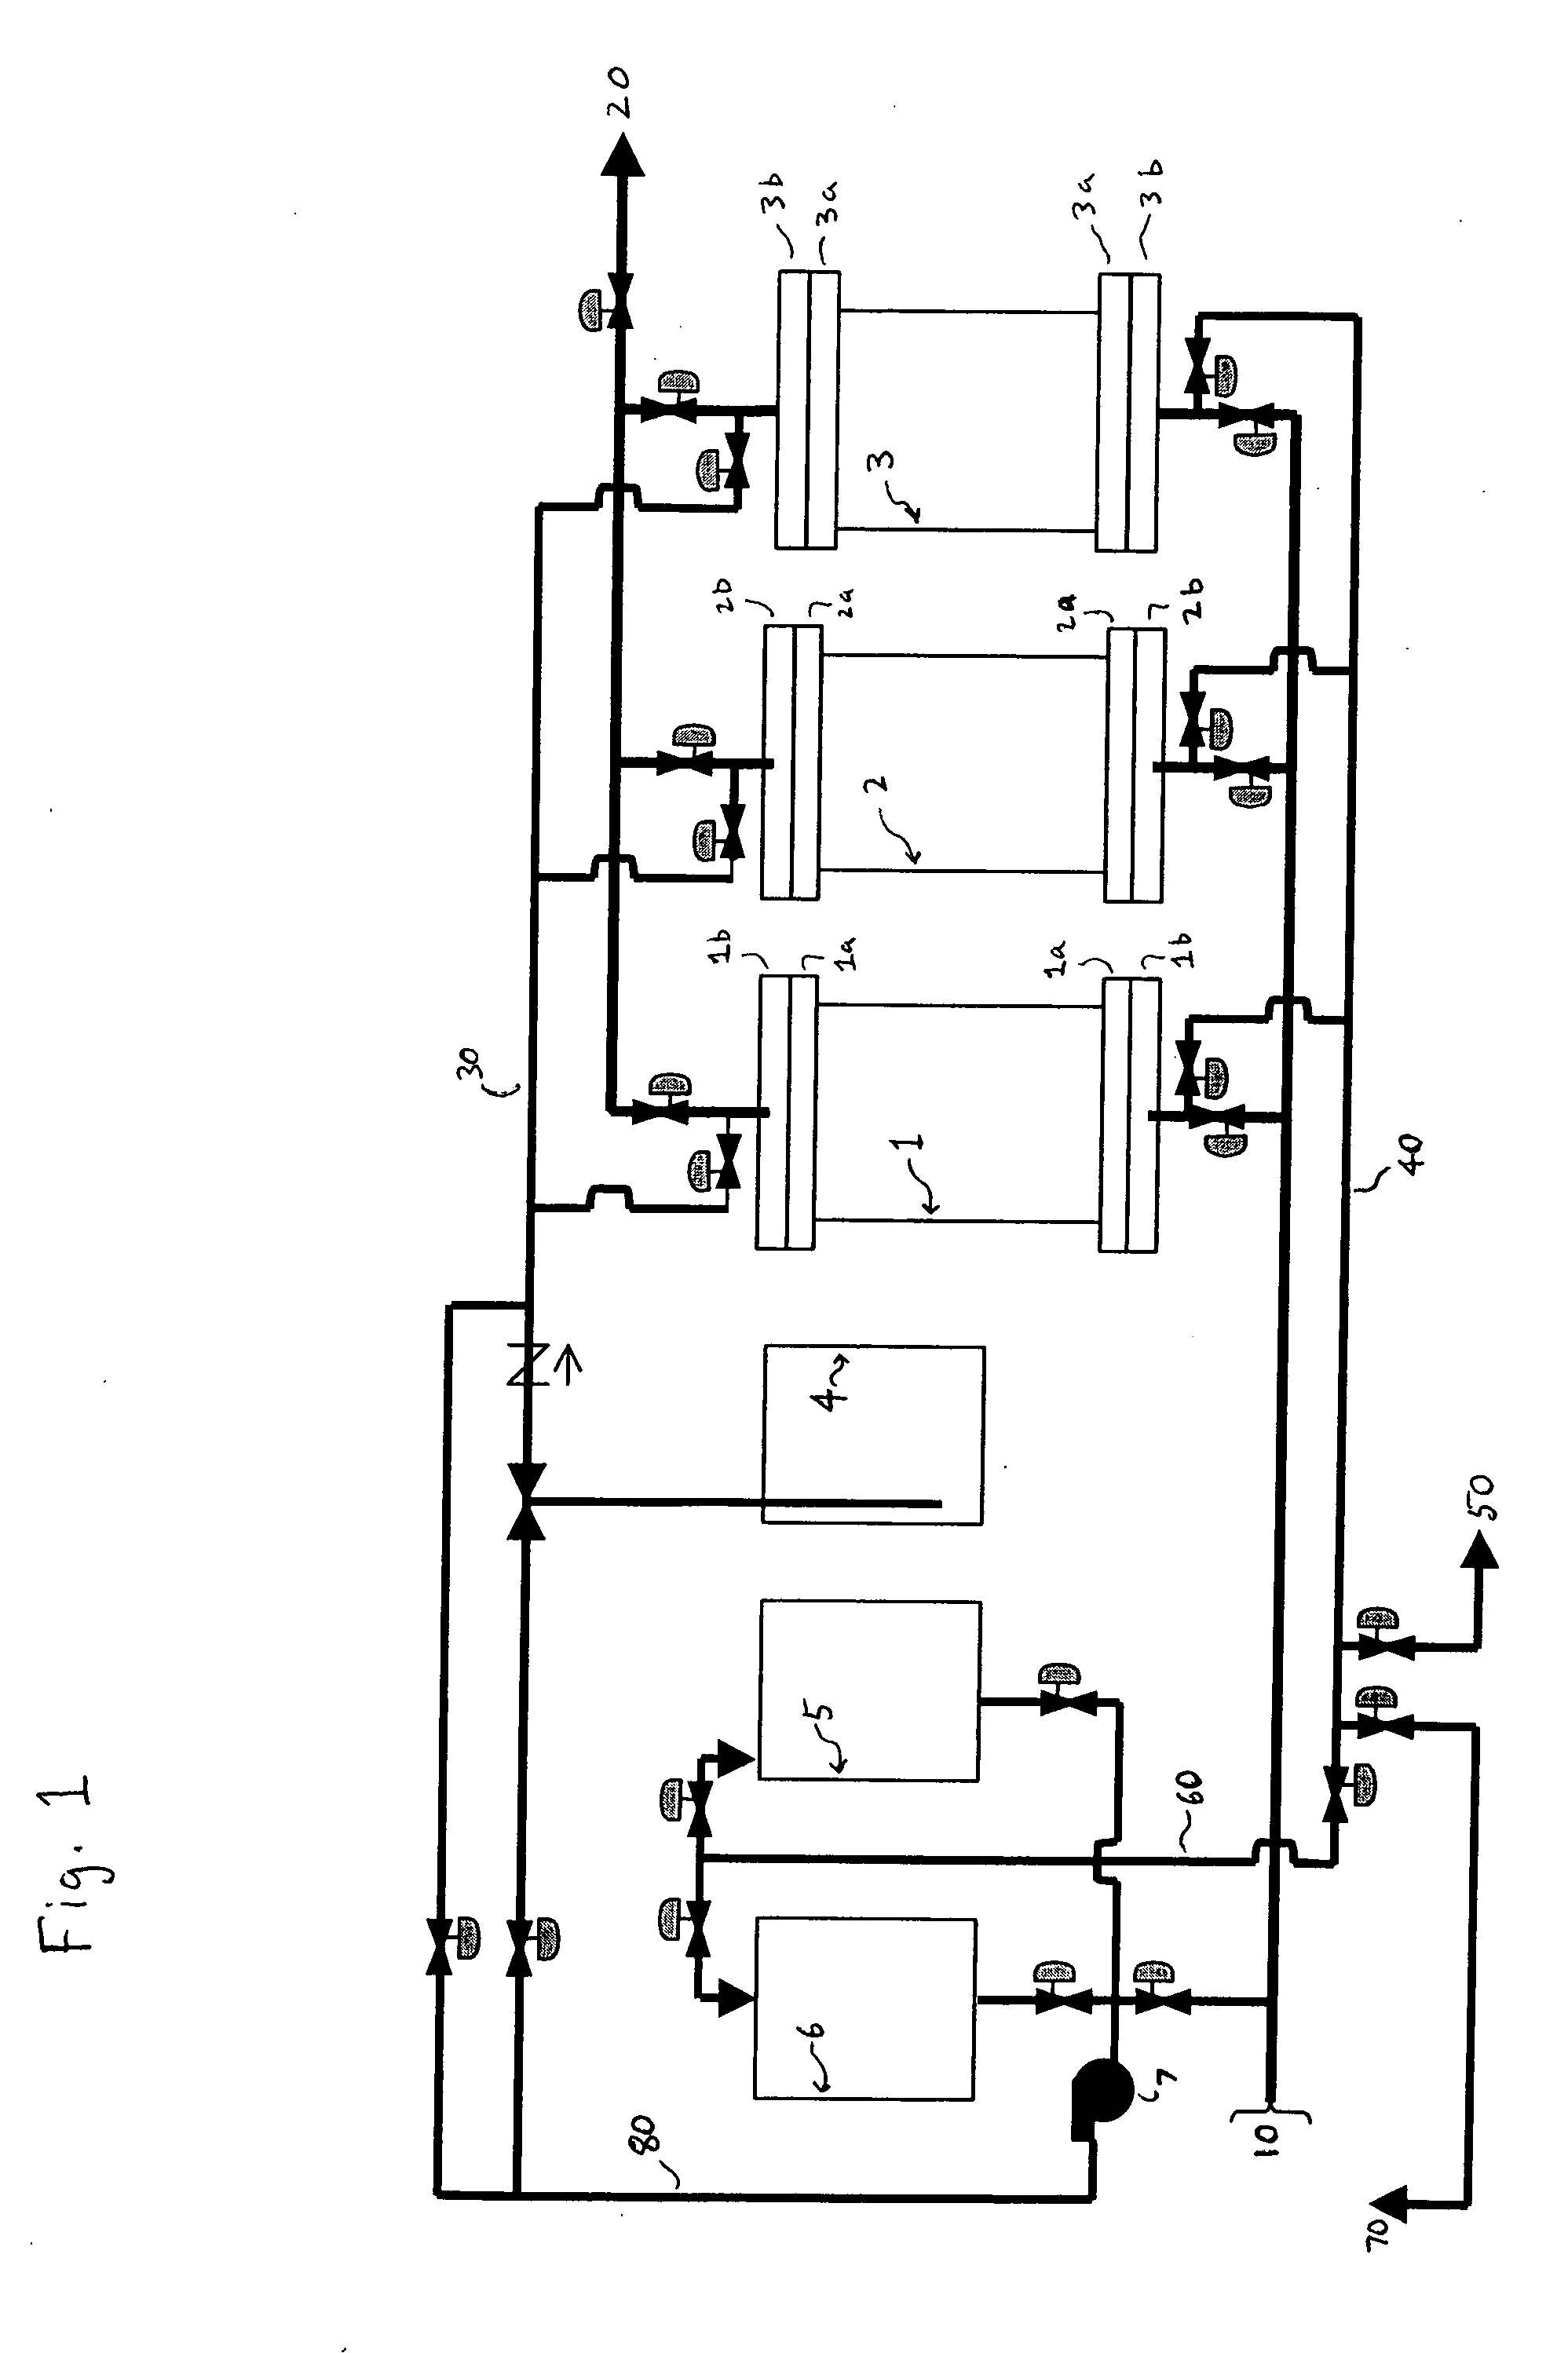 Water treatment system with low waste volume